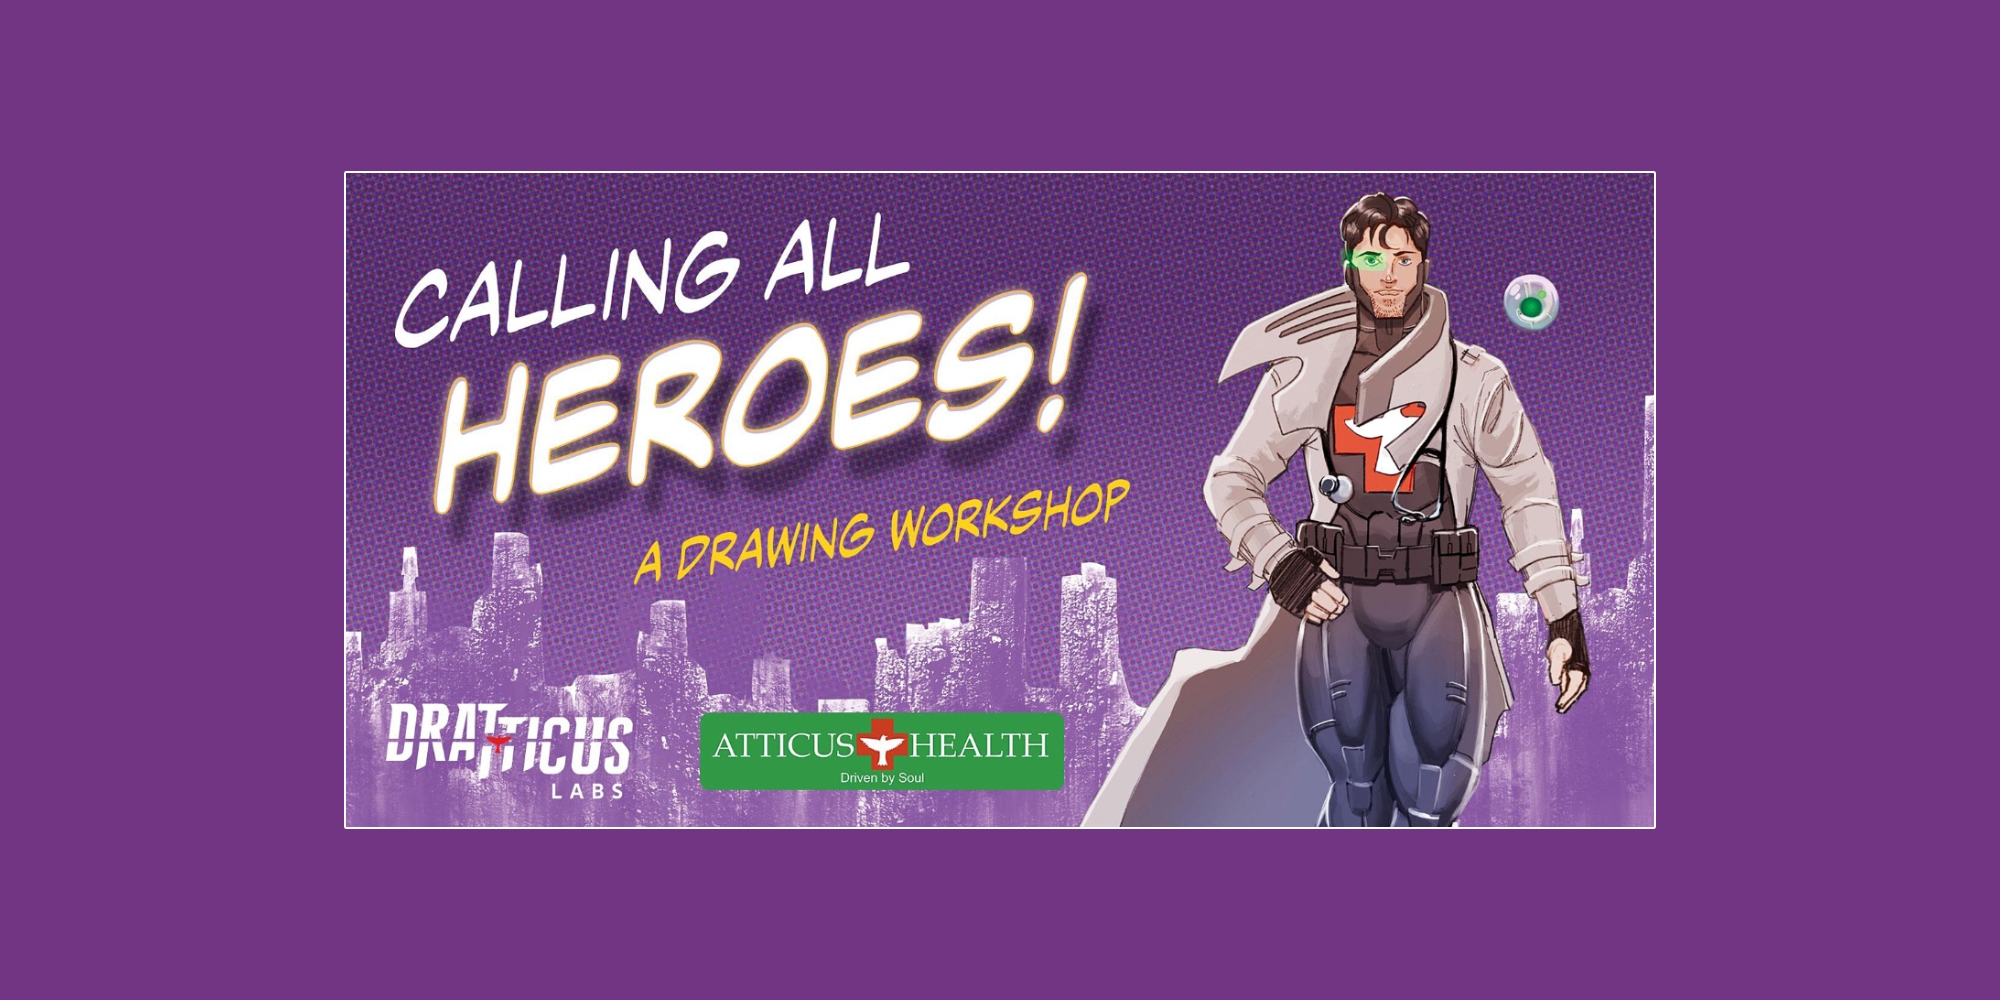 Dratticus Labs: A Drawing Workshop